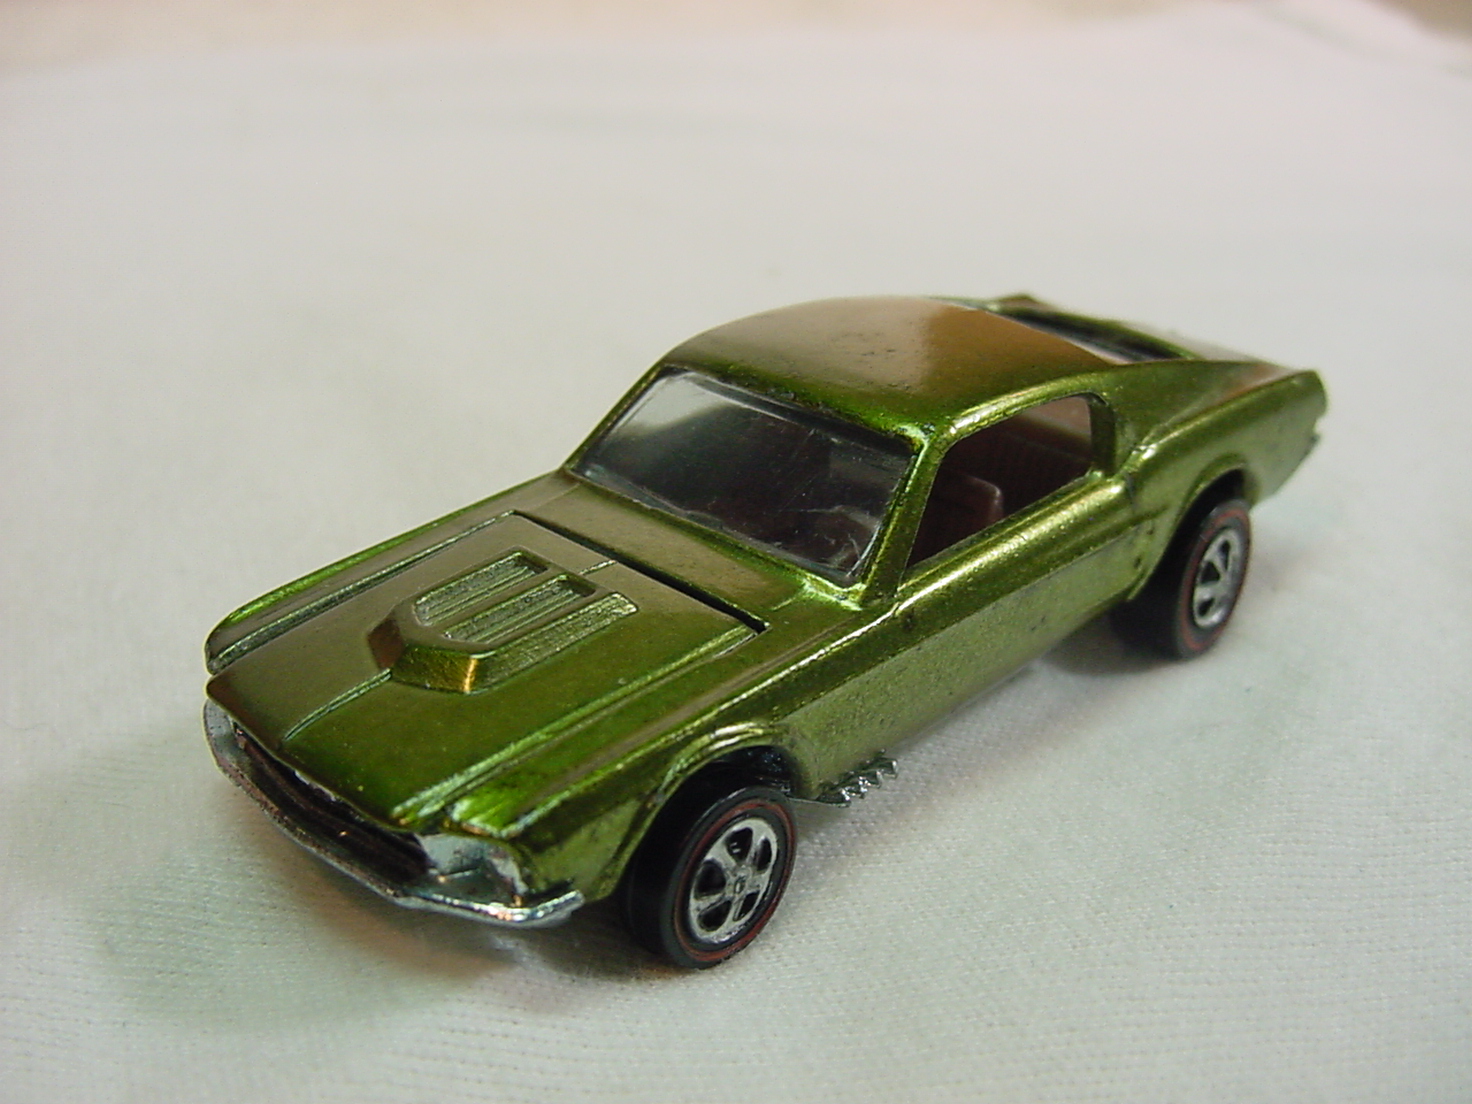 https://static.wikia.nocookie.net/hotwheels/images/6/66/Cmustng_olive.jpg/revision/latest?cb=20130113170537